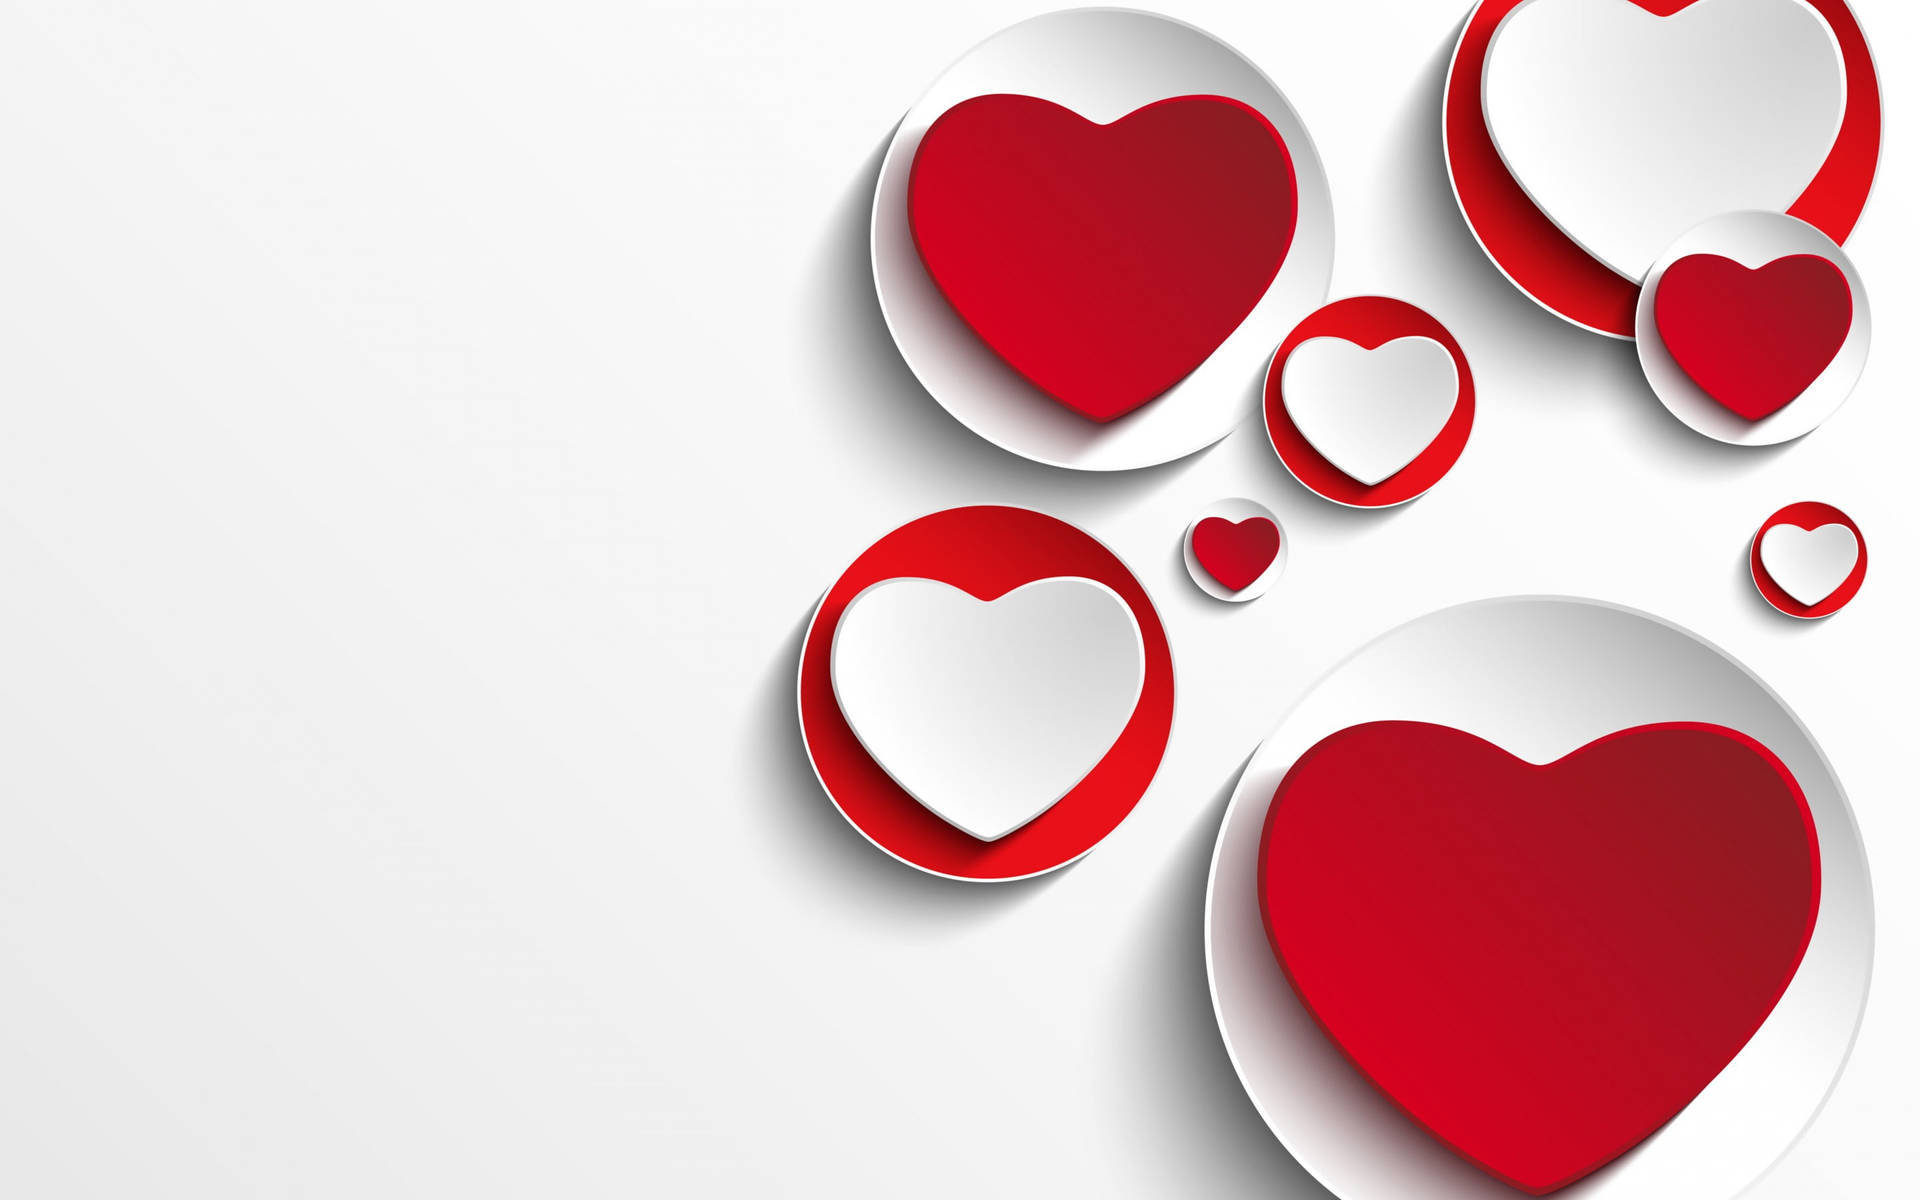 Hearts On Plates Background Design Wallpaper